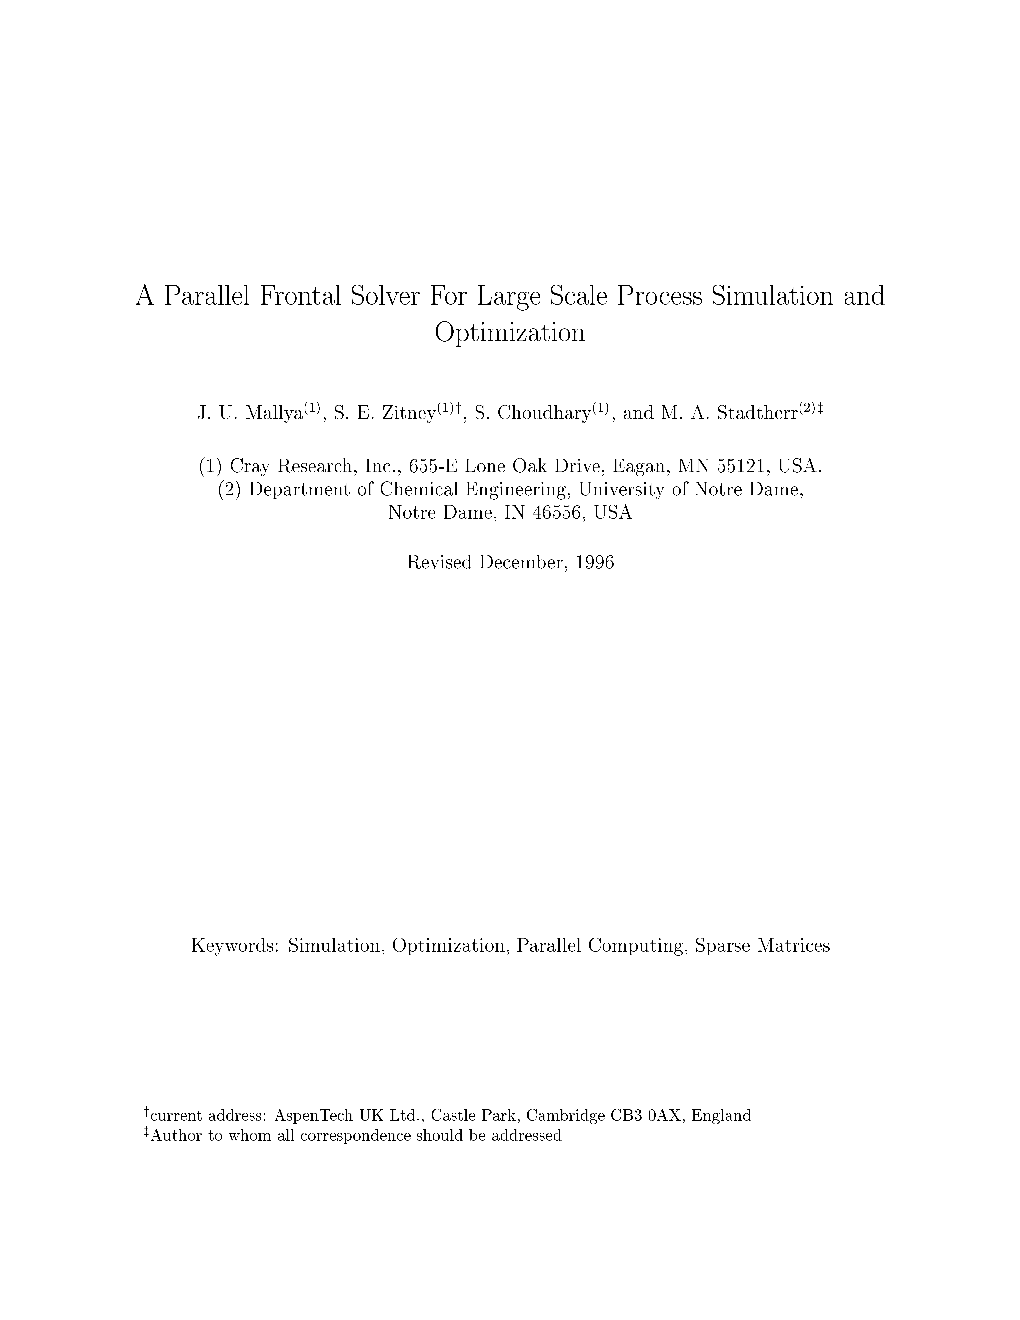 A Parallel Frontal Solver for Large Scale Process Simulation And